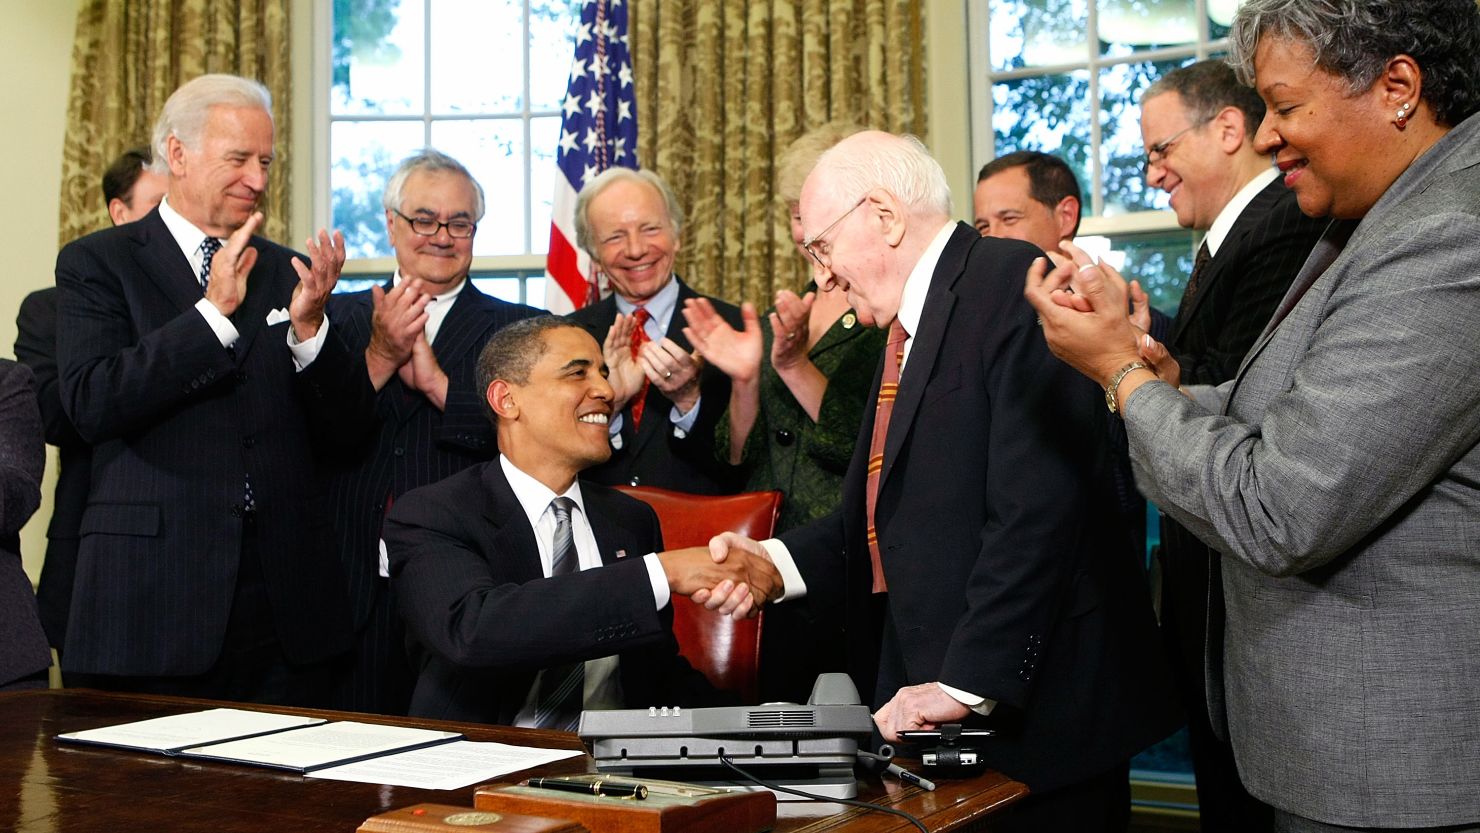 President Barack Obama shakes hands with gay rights activist Frank Kameny in June 2009 after signing a memorandum to extend benefits to same-sex partners of federal employees.